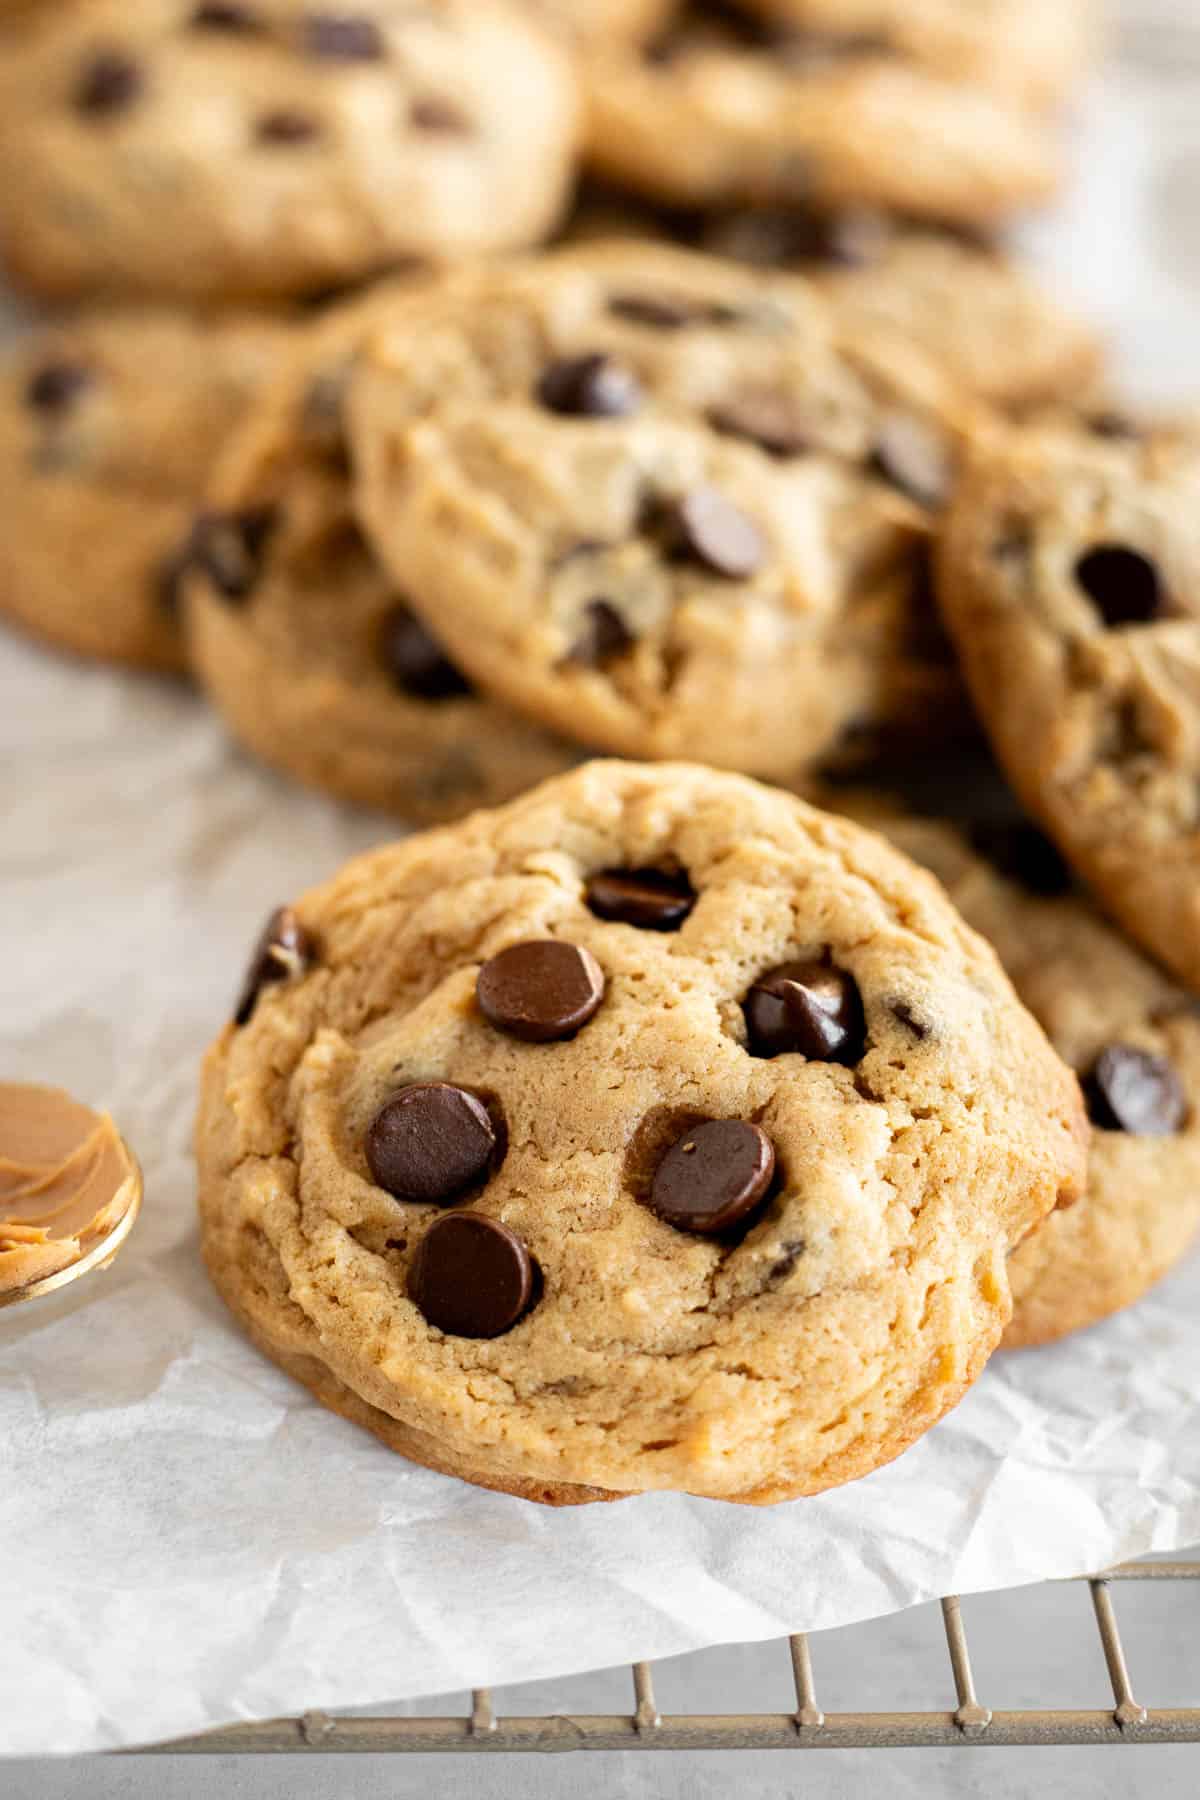 Peanut Butter Sour Cream Cookies on parchment paper with chocolate chips.